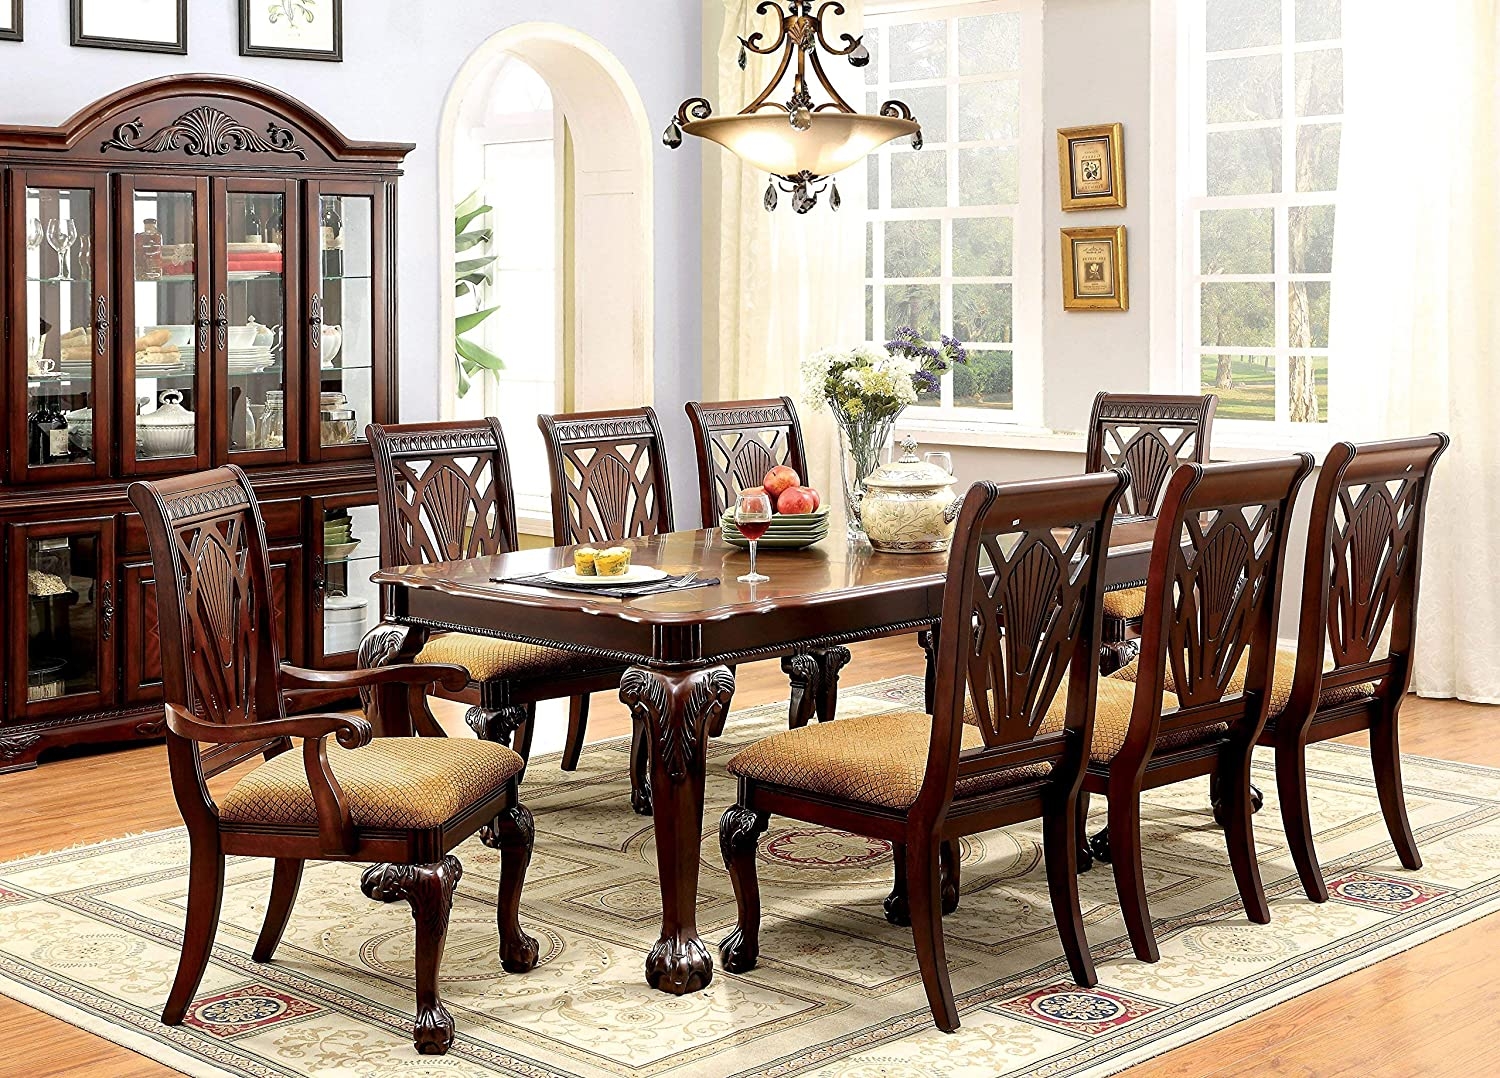 Dining Room Sets For 10 People